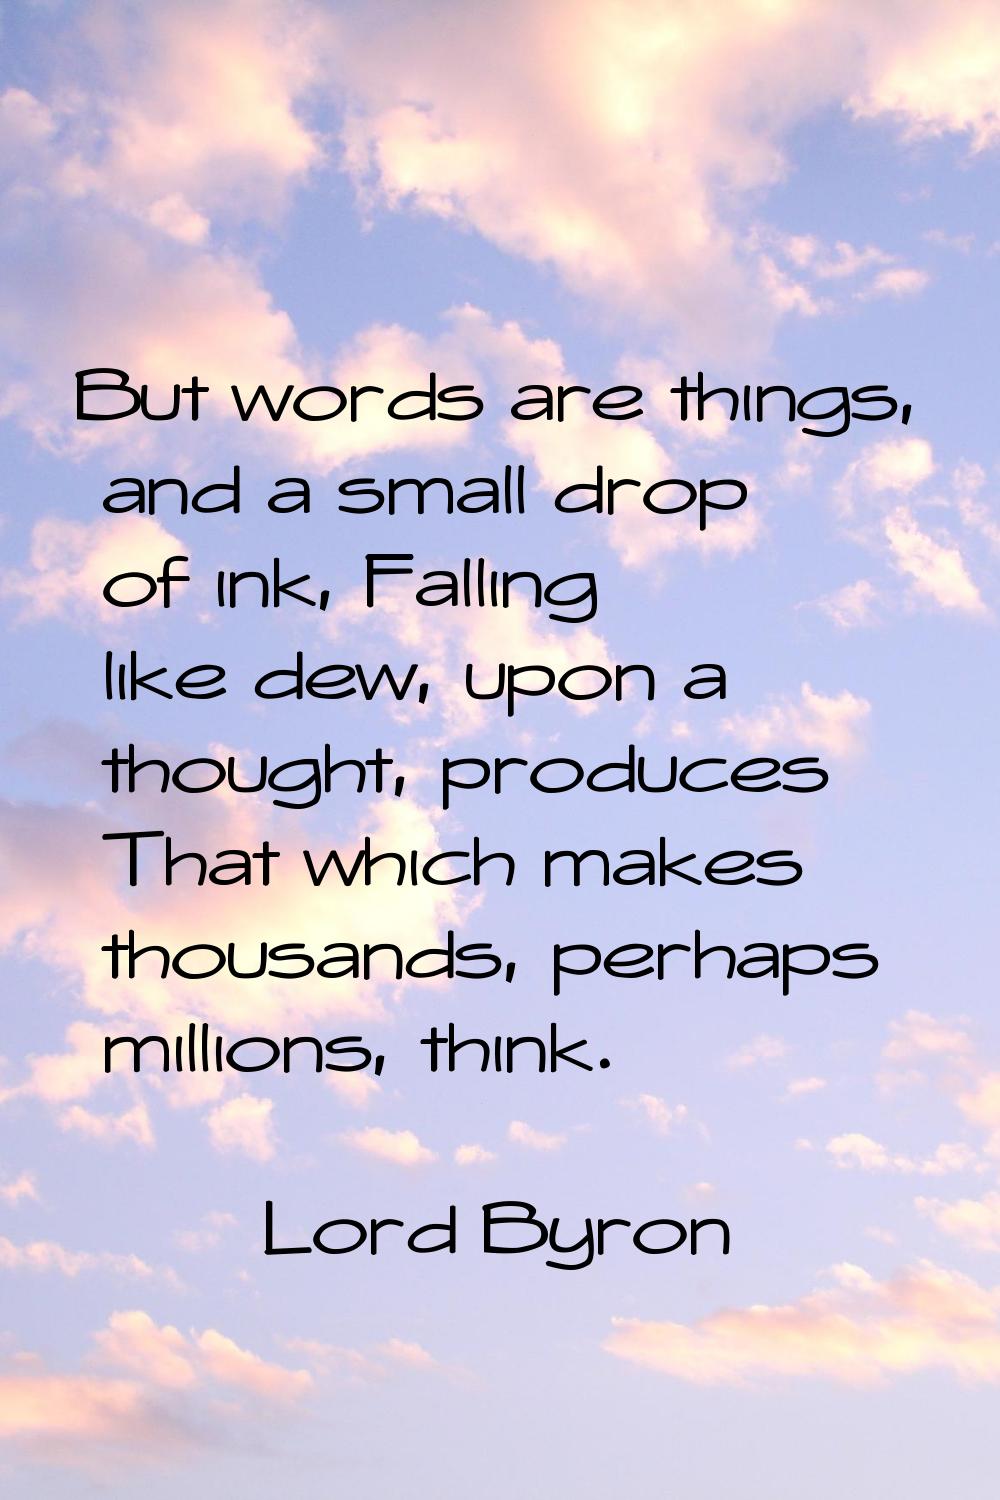 But words are things, and a small drop of ink, Falling like dew, upon a thought, produces That whic